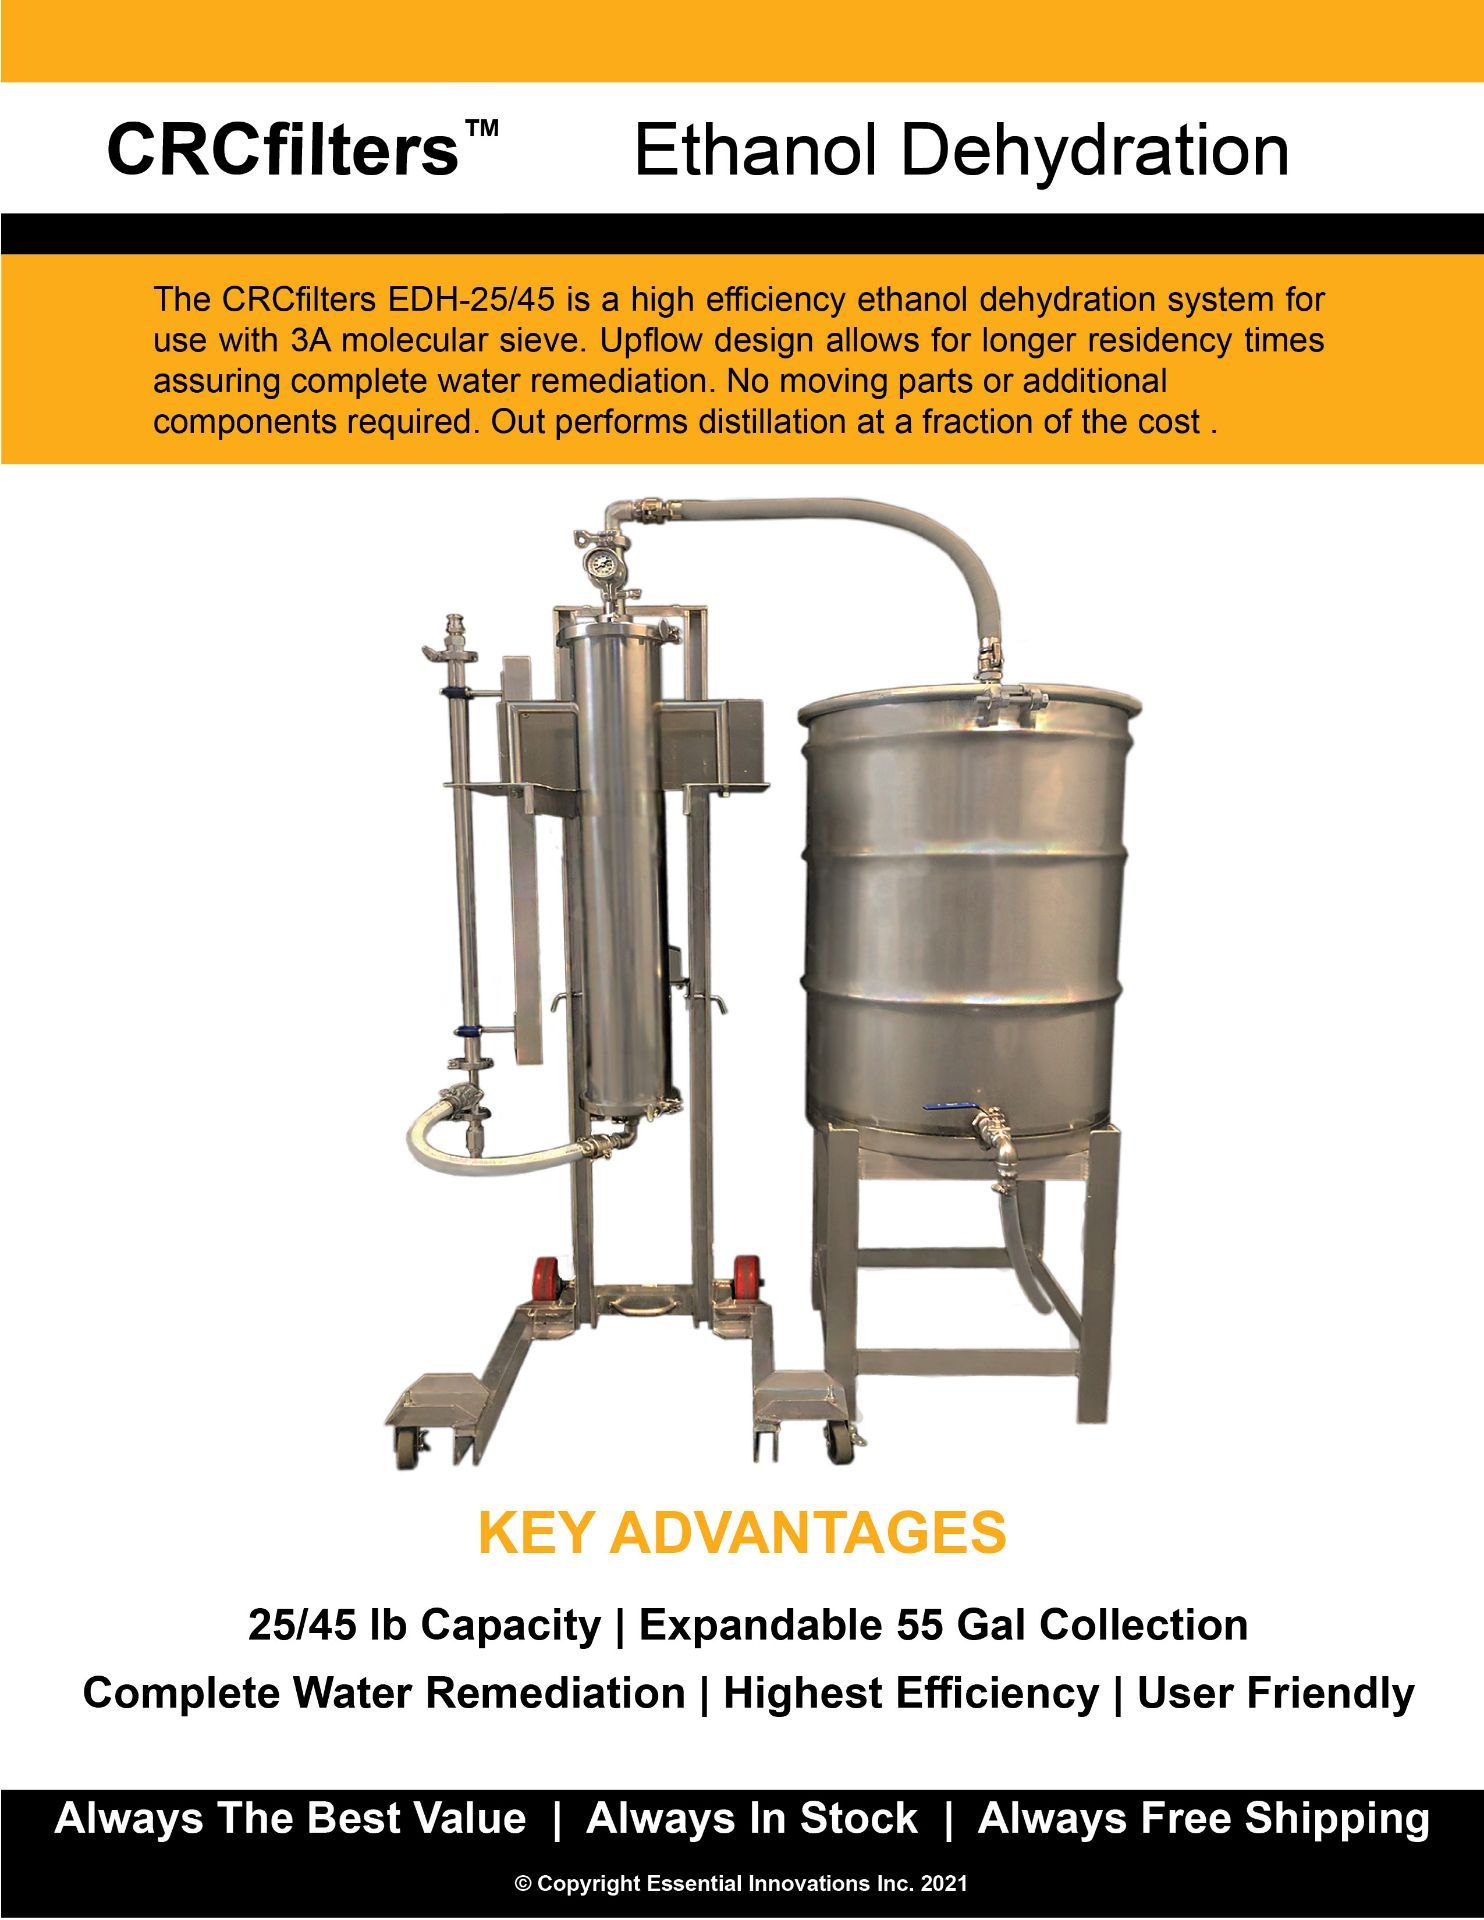 Used/Refurbished CRC Filters EDH-25 Ethanol Dehydration System for water removal from alcohol - Image 7 of 7